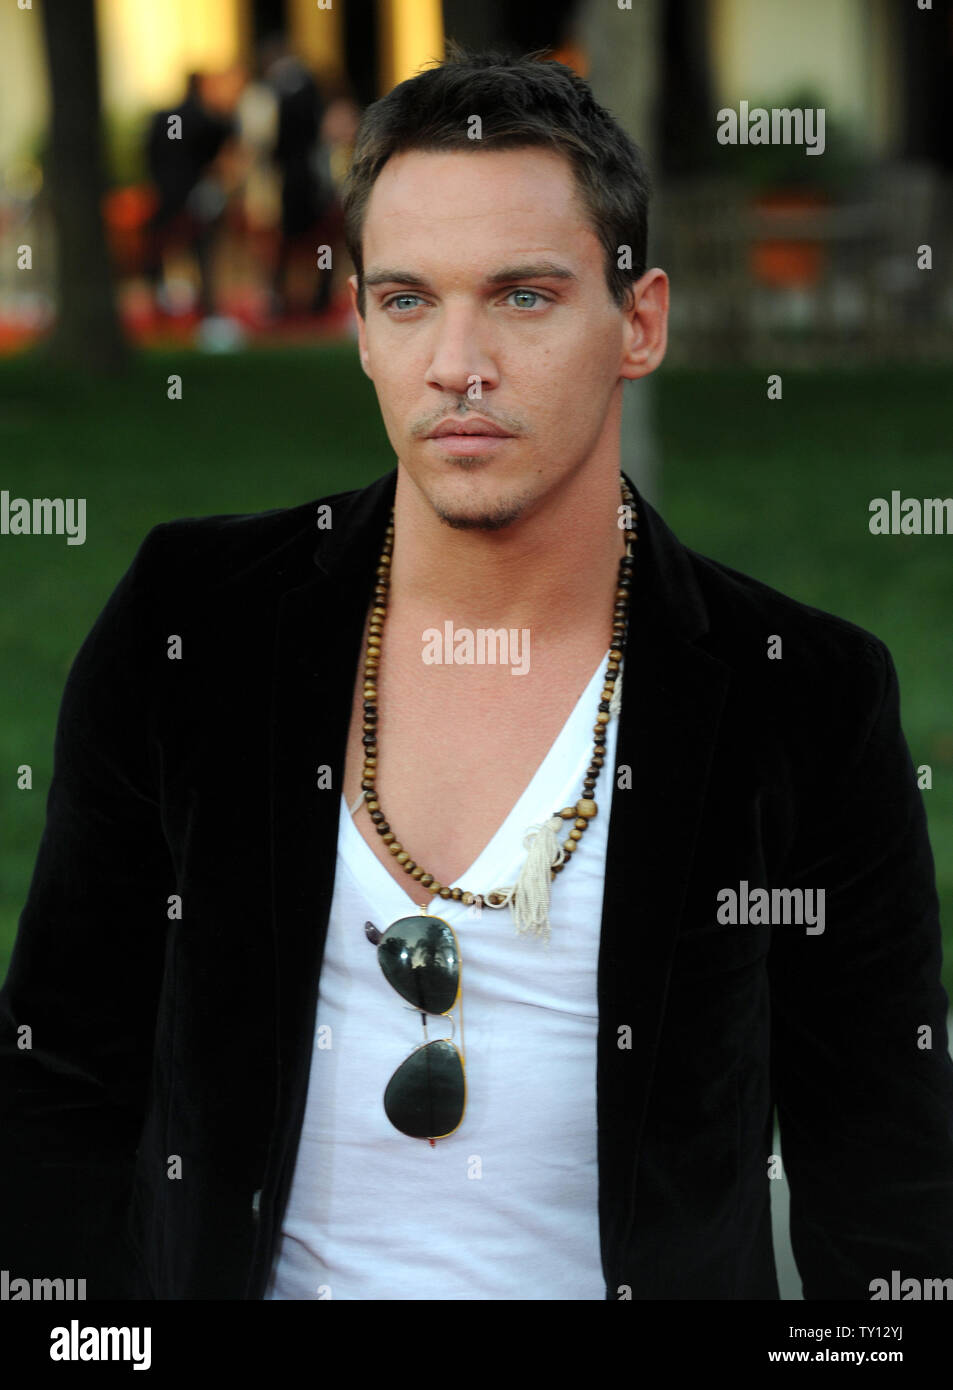 Actor Jonathan Rhys Meyers attends the premiere of the motion picture biographical drama "The Soloist", on the Paramount Studios lot in Los Angeles on April 20, 2009. (UPI Photo/Jim Ruymen) Stock Photo